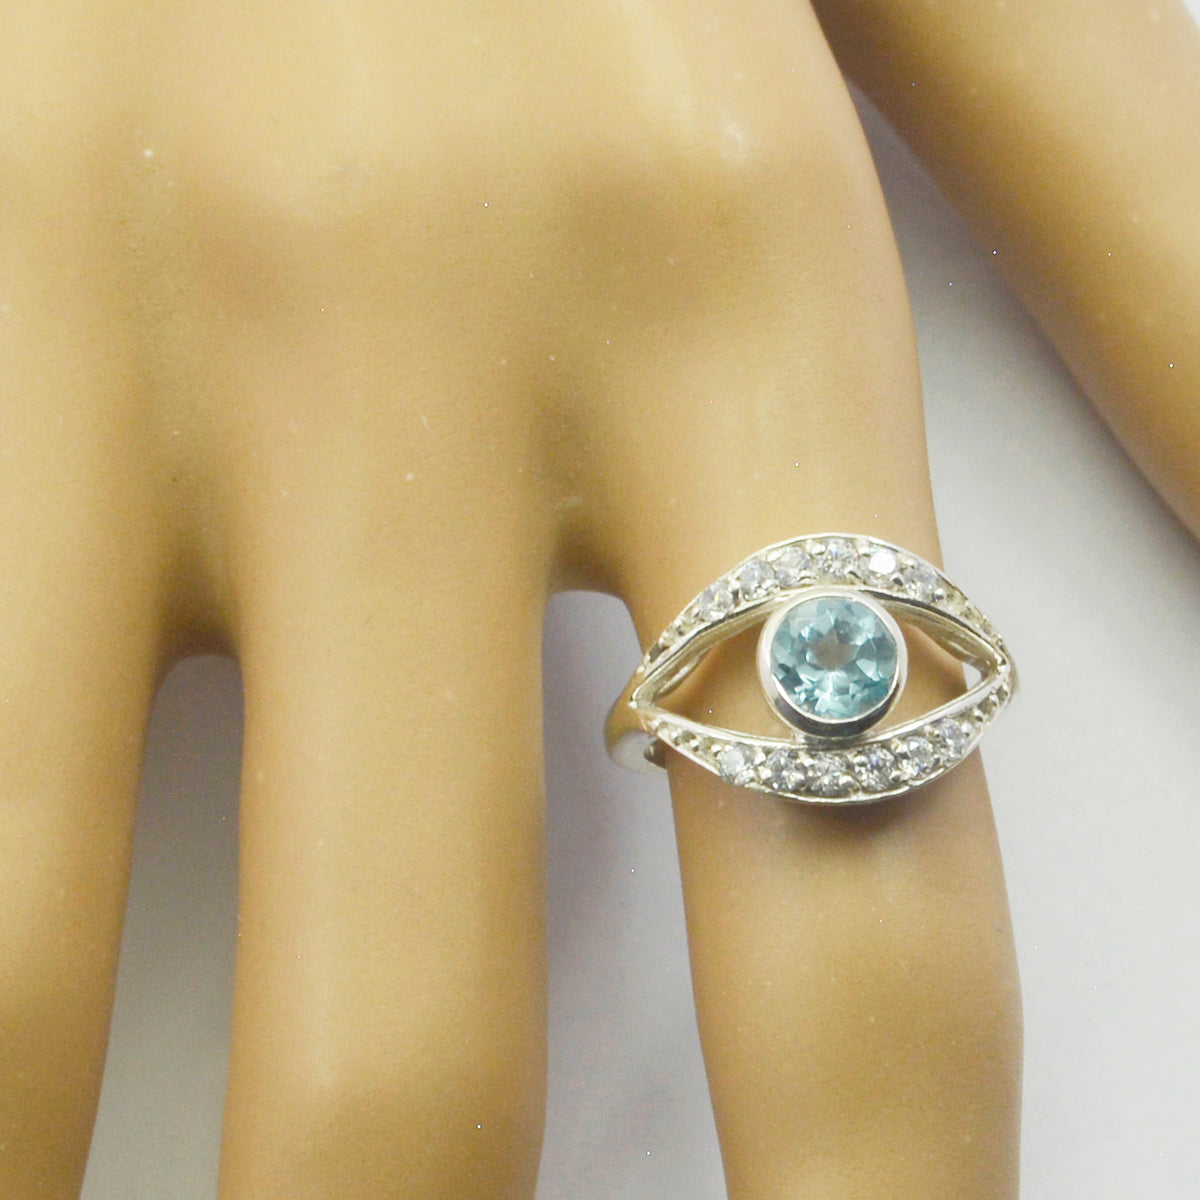 Riyo Superb Stone Blue Topaz Solid Silver Ring Make Your Own Jewelry